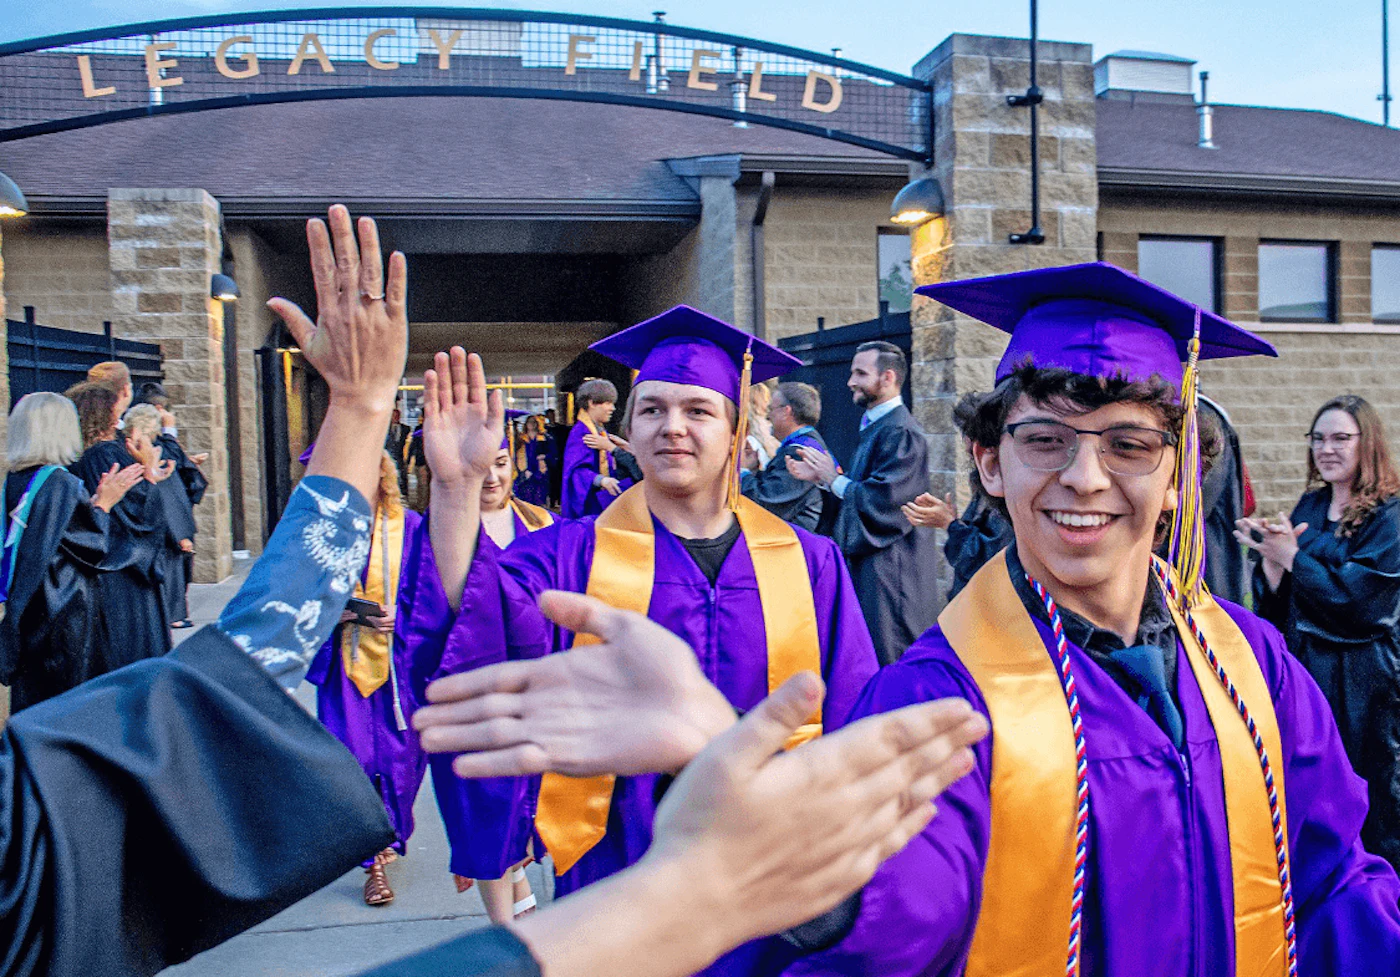 In this Daily News photo, Greenville High School seniors Joshua Jackson, left, and Thaden Ortez high-five teachers and faculty after the school's 149th commencement ceremony this year. Photo Credit: Cory Smith, The Daily News